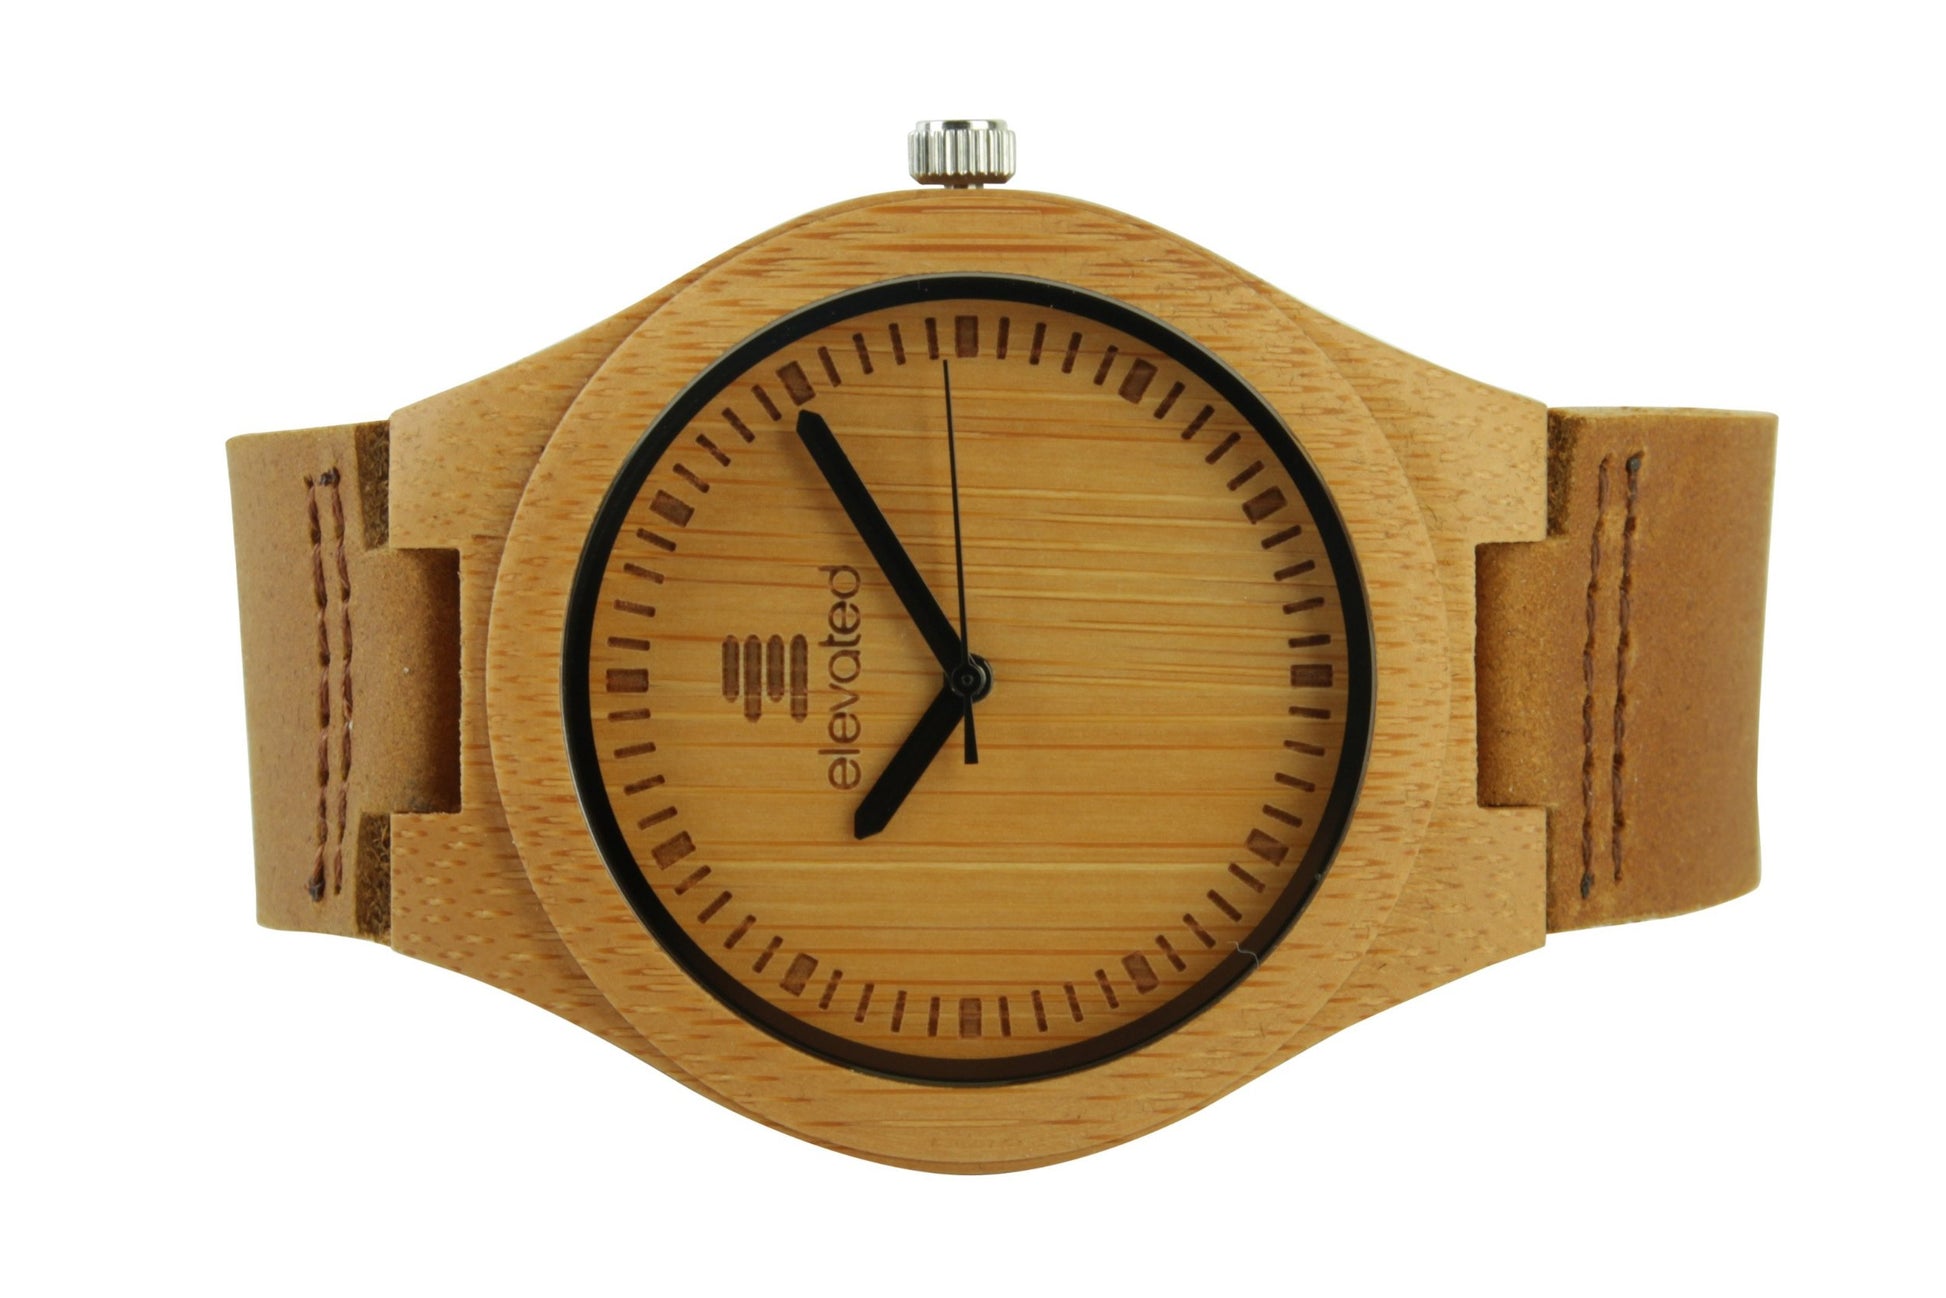 ELEVATED SHADES WOOD WATCH BAMBOO